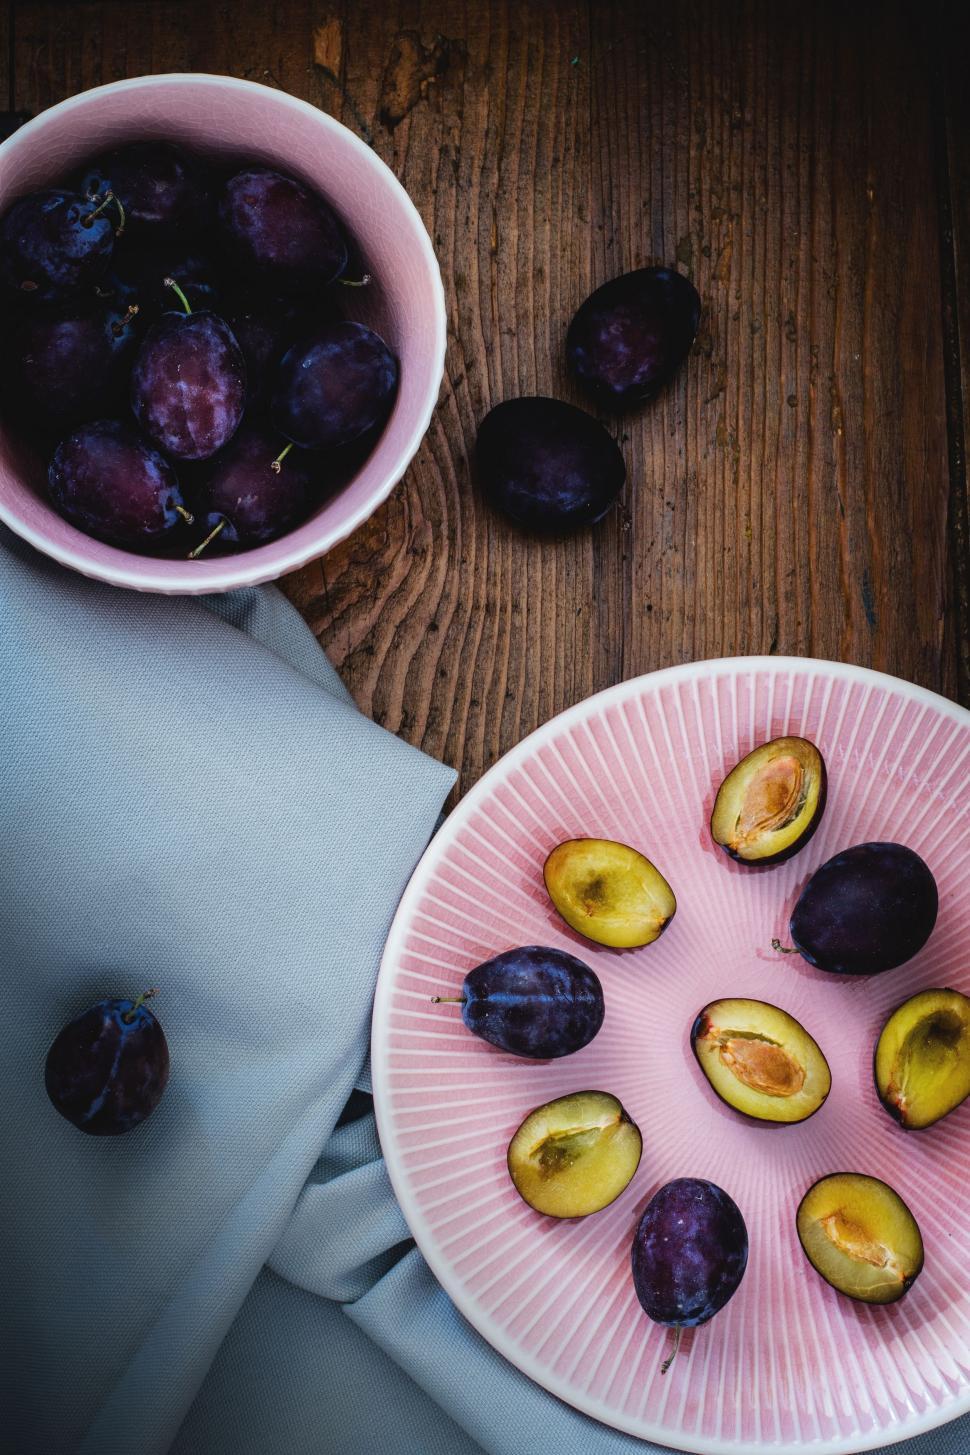 Free Image of Bowl and plate full of plums on grey table cloth  